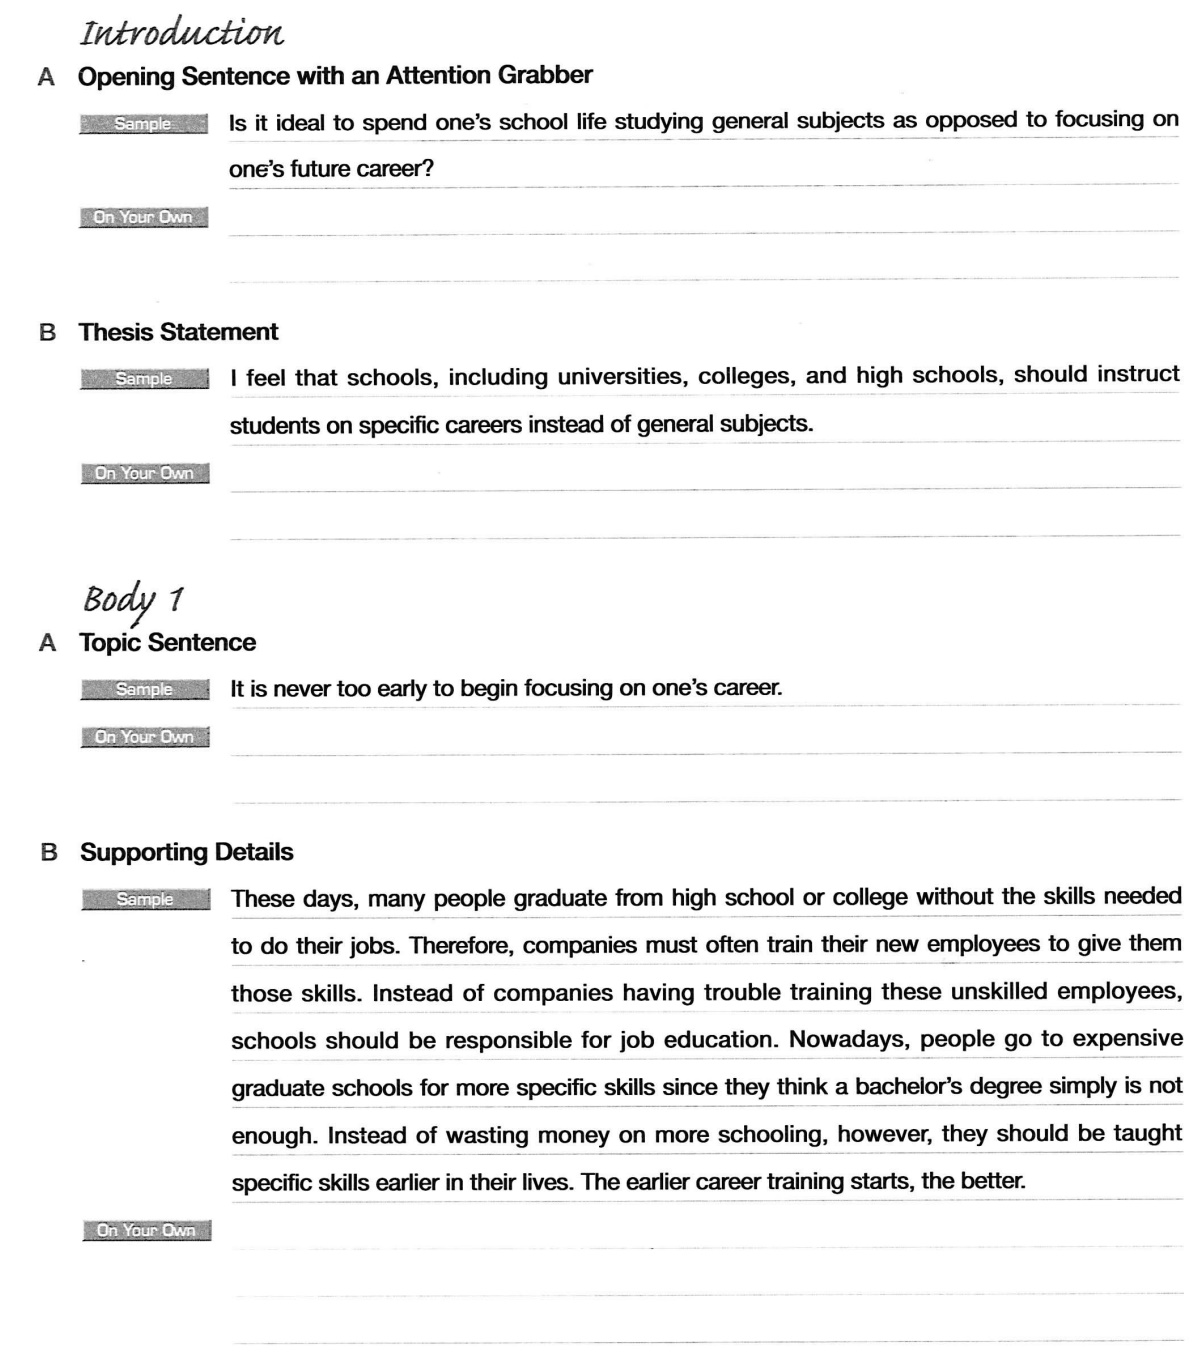 Outlining_School Teach for Careers or General Knowledge